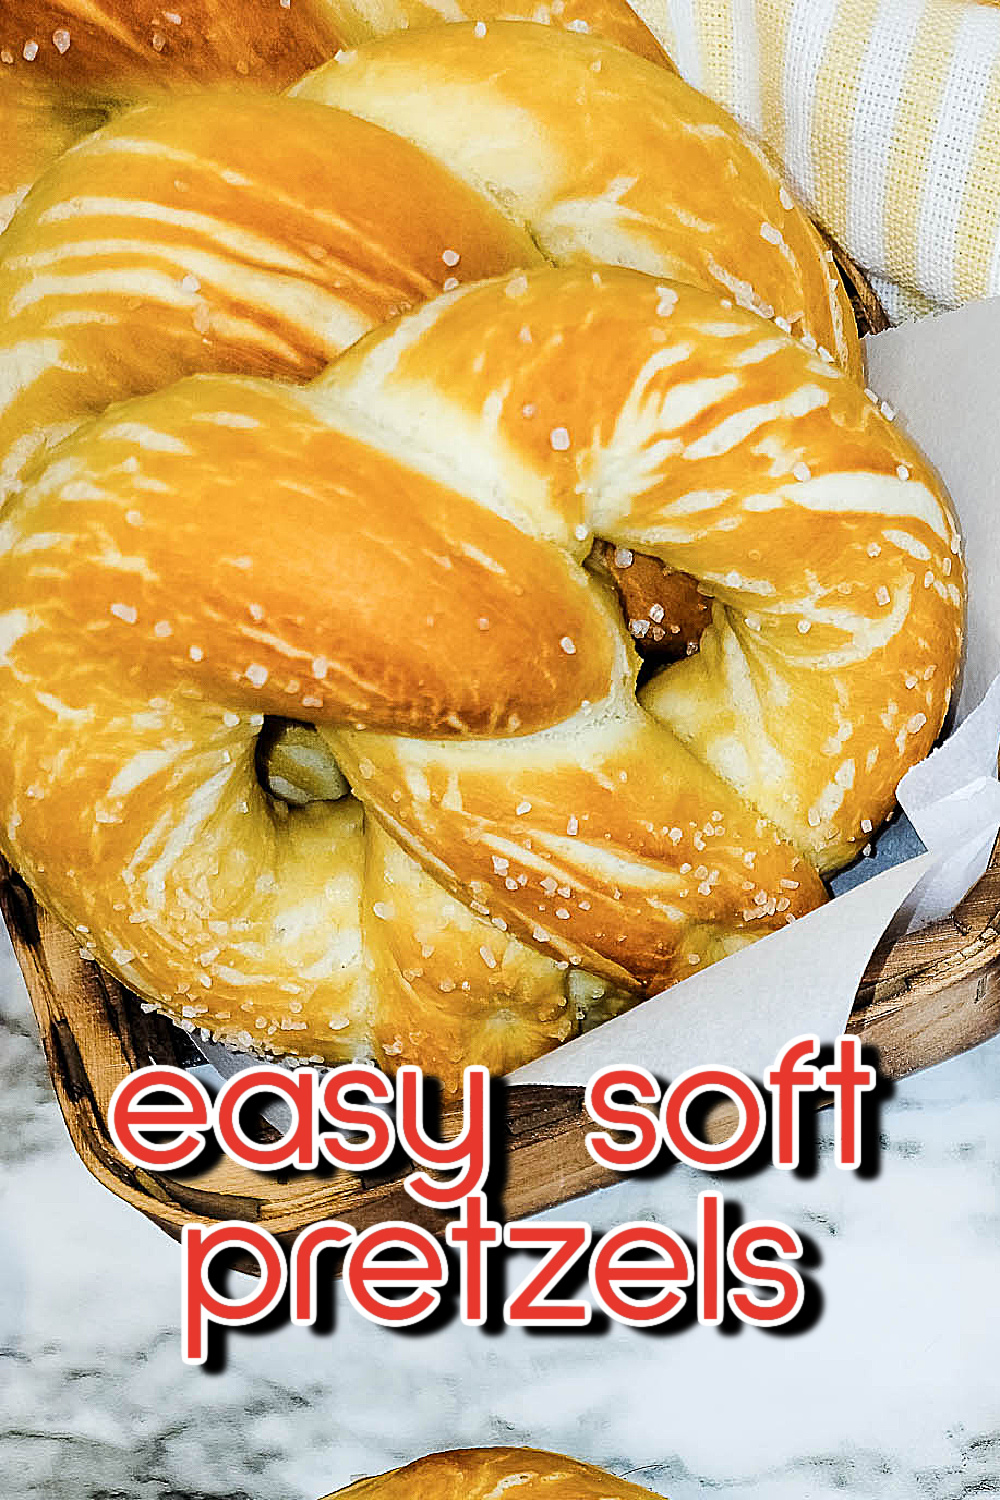 Soft-baked, chewy, and fluffy inside, these homemade pretzels take no time at all to make. From-Scratch Soft Pretzels are soft and chewy on the inside with a salty and crackly brown outside. Just when you thought homemade soft pretzels couldn’t get any better, they do! From-Scratch Soft Pretzels have a wonderful flavor & chewy bite.